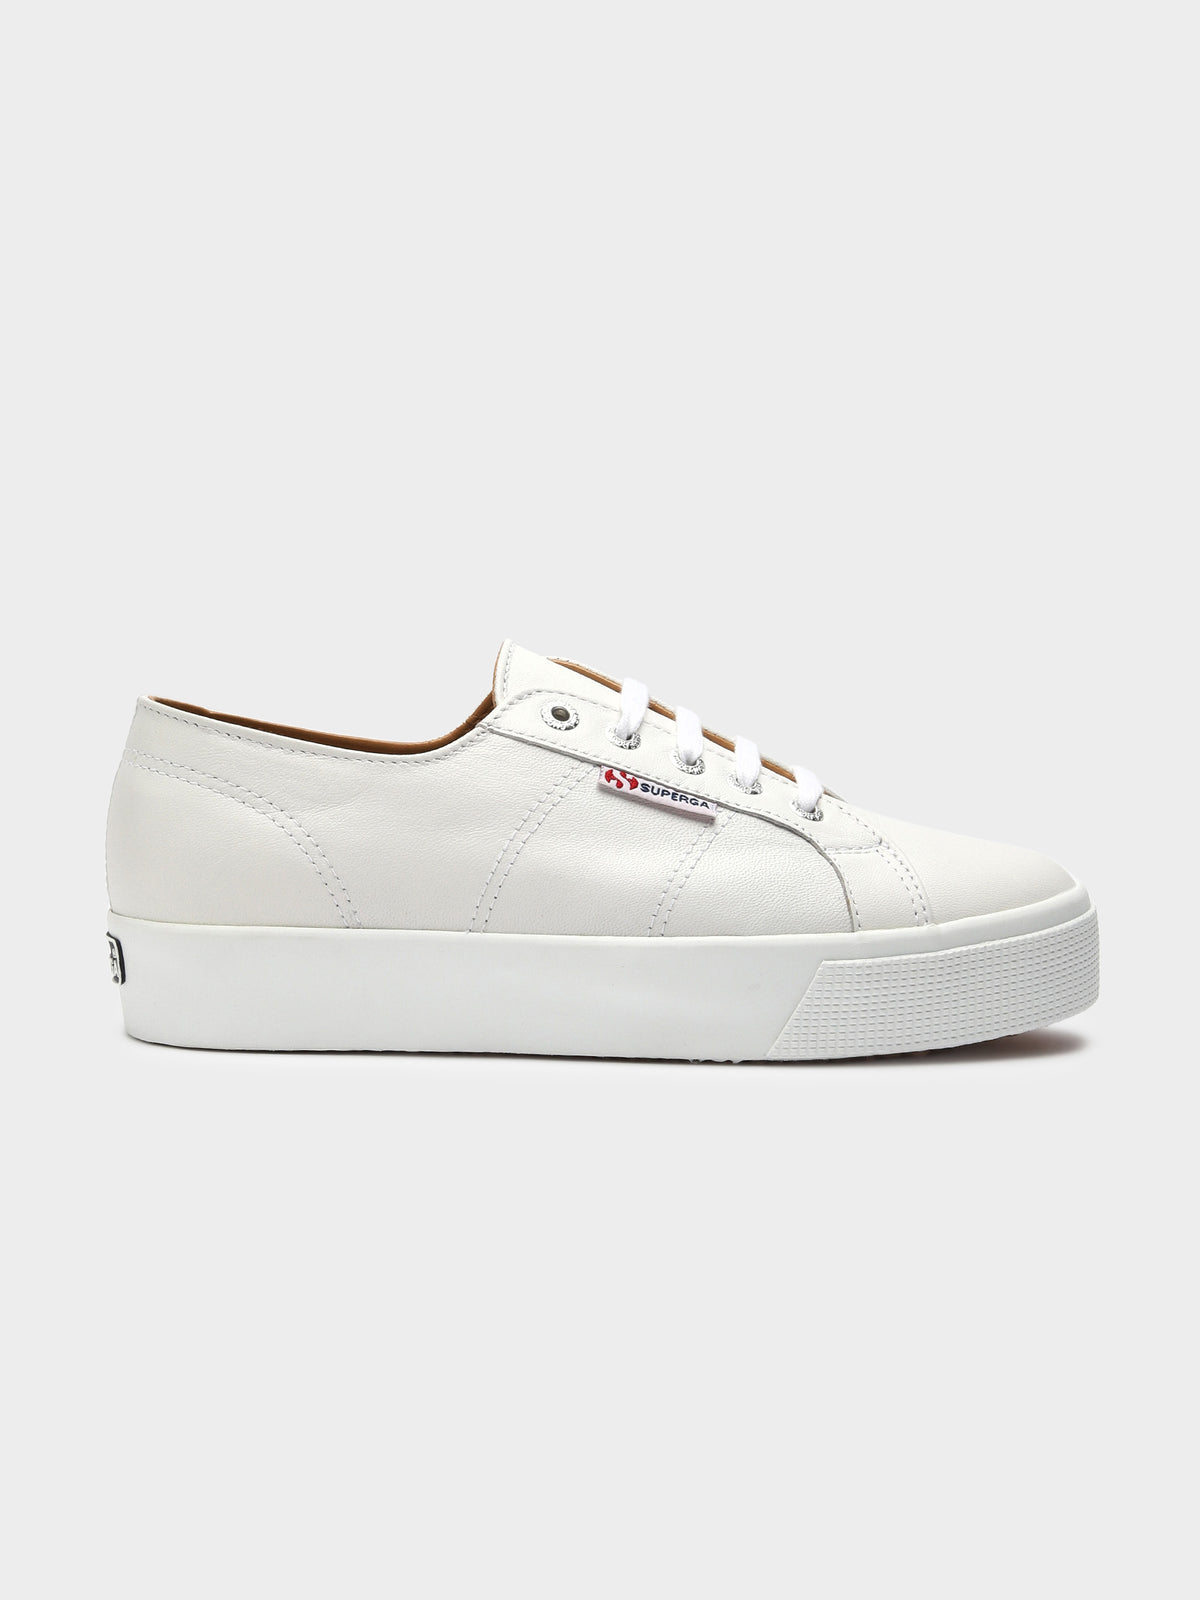 Womens 2730 Platform Sneakers in White Nappa Leather